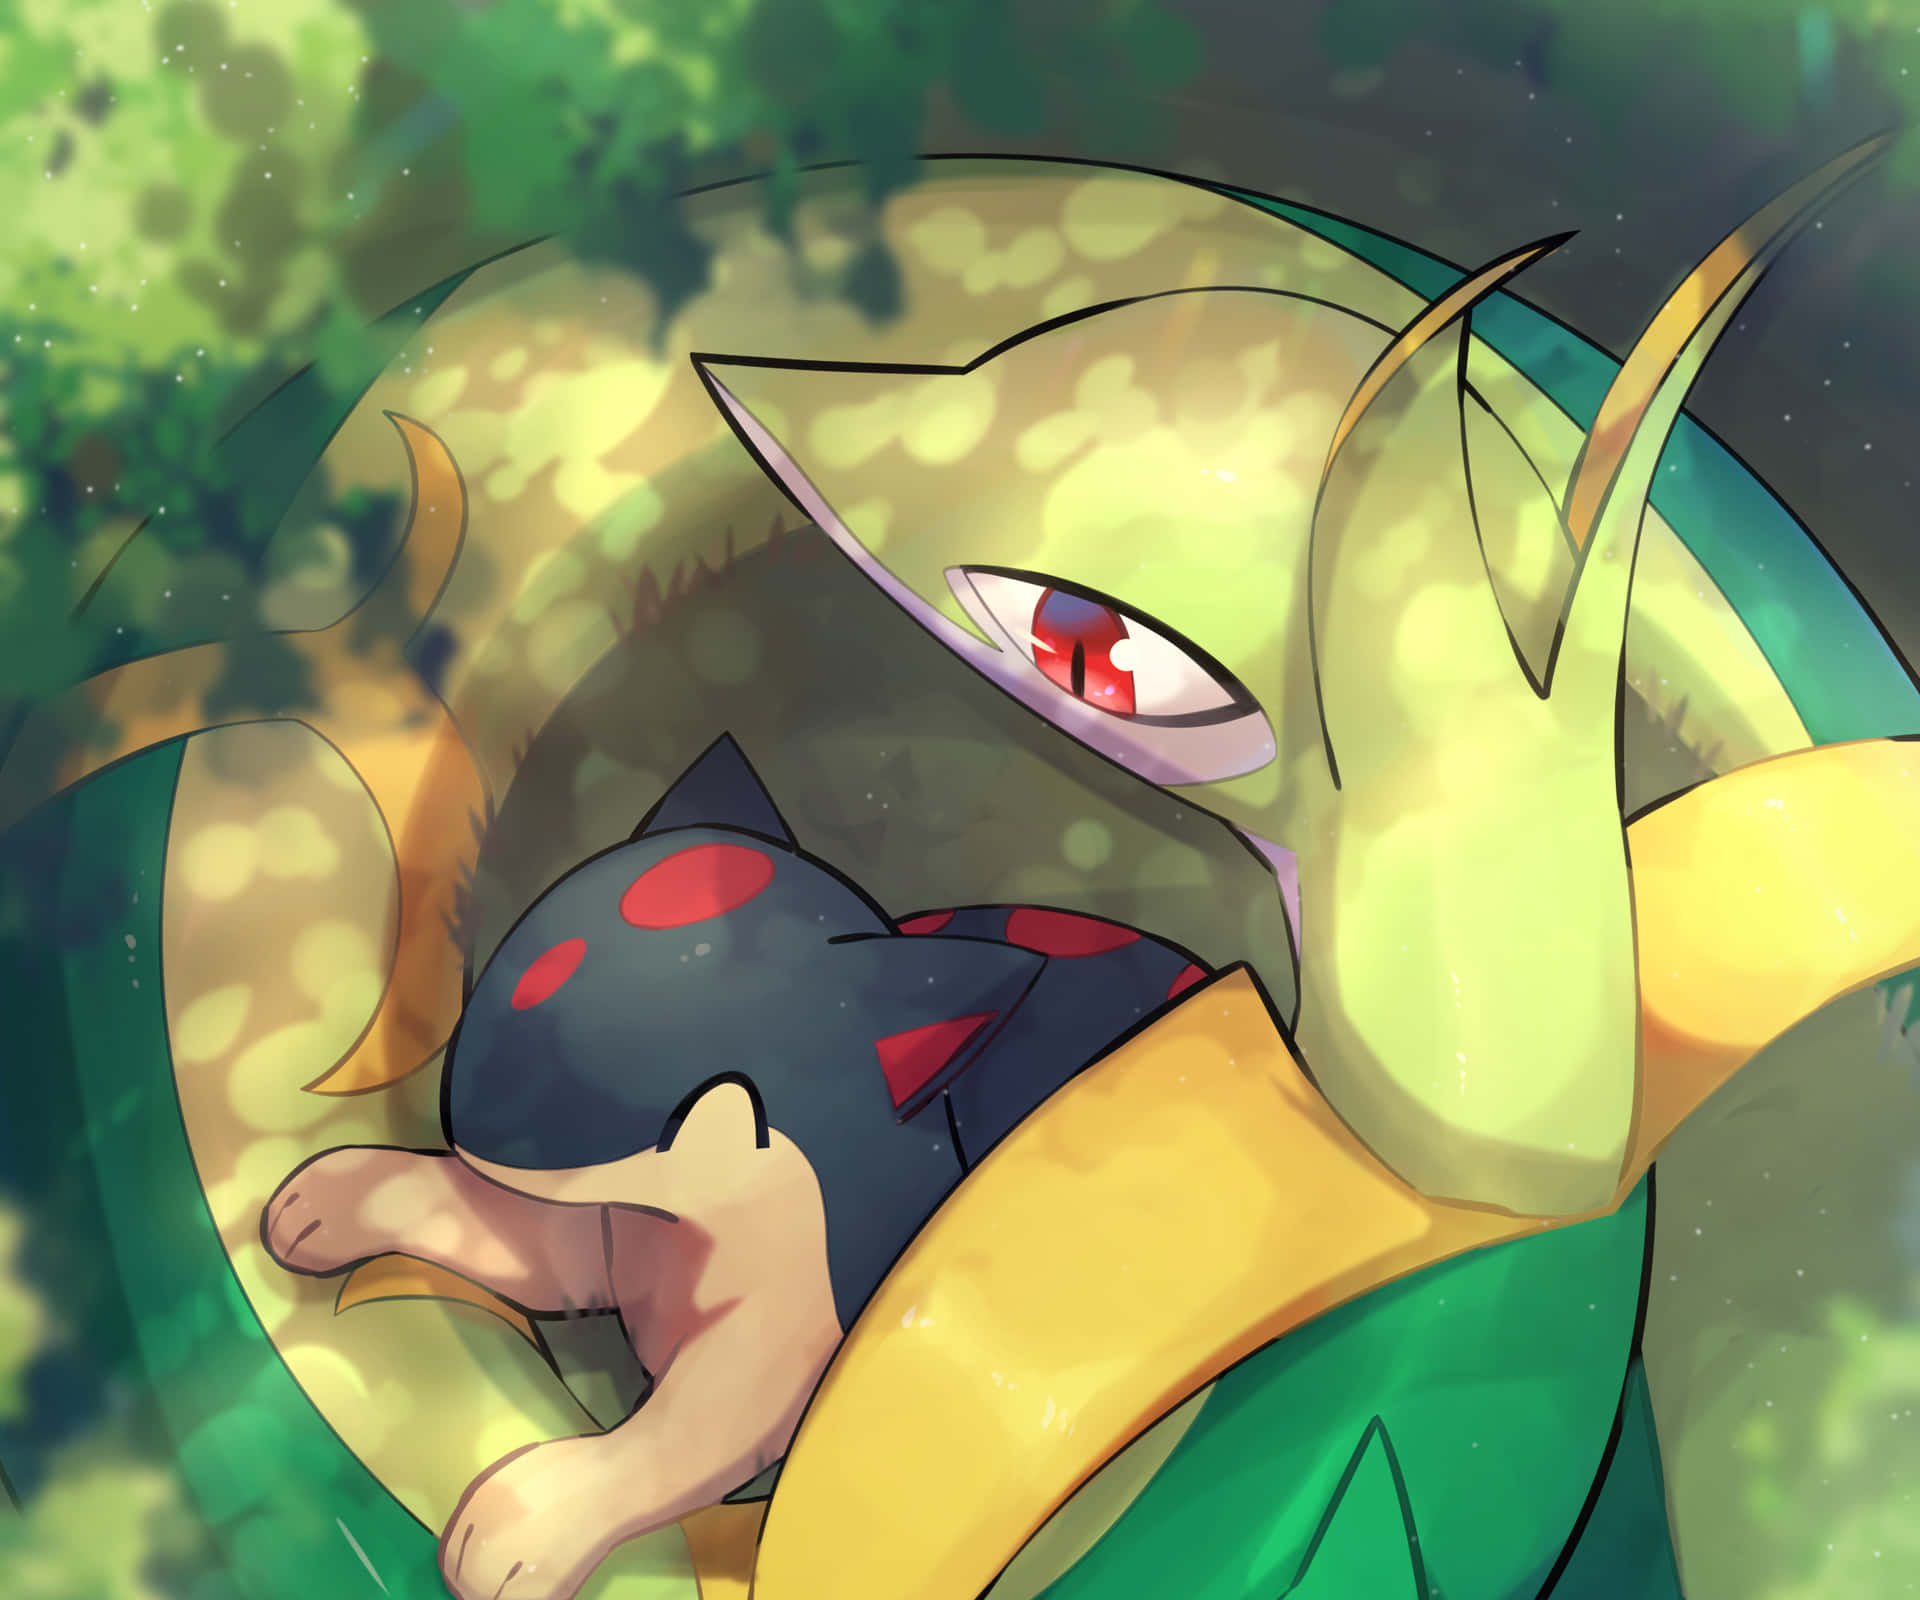 Epic Battle Stance - Serperior and Cyndaquil in Pokemon Universe Wallpaper